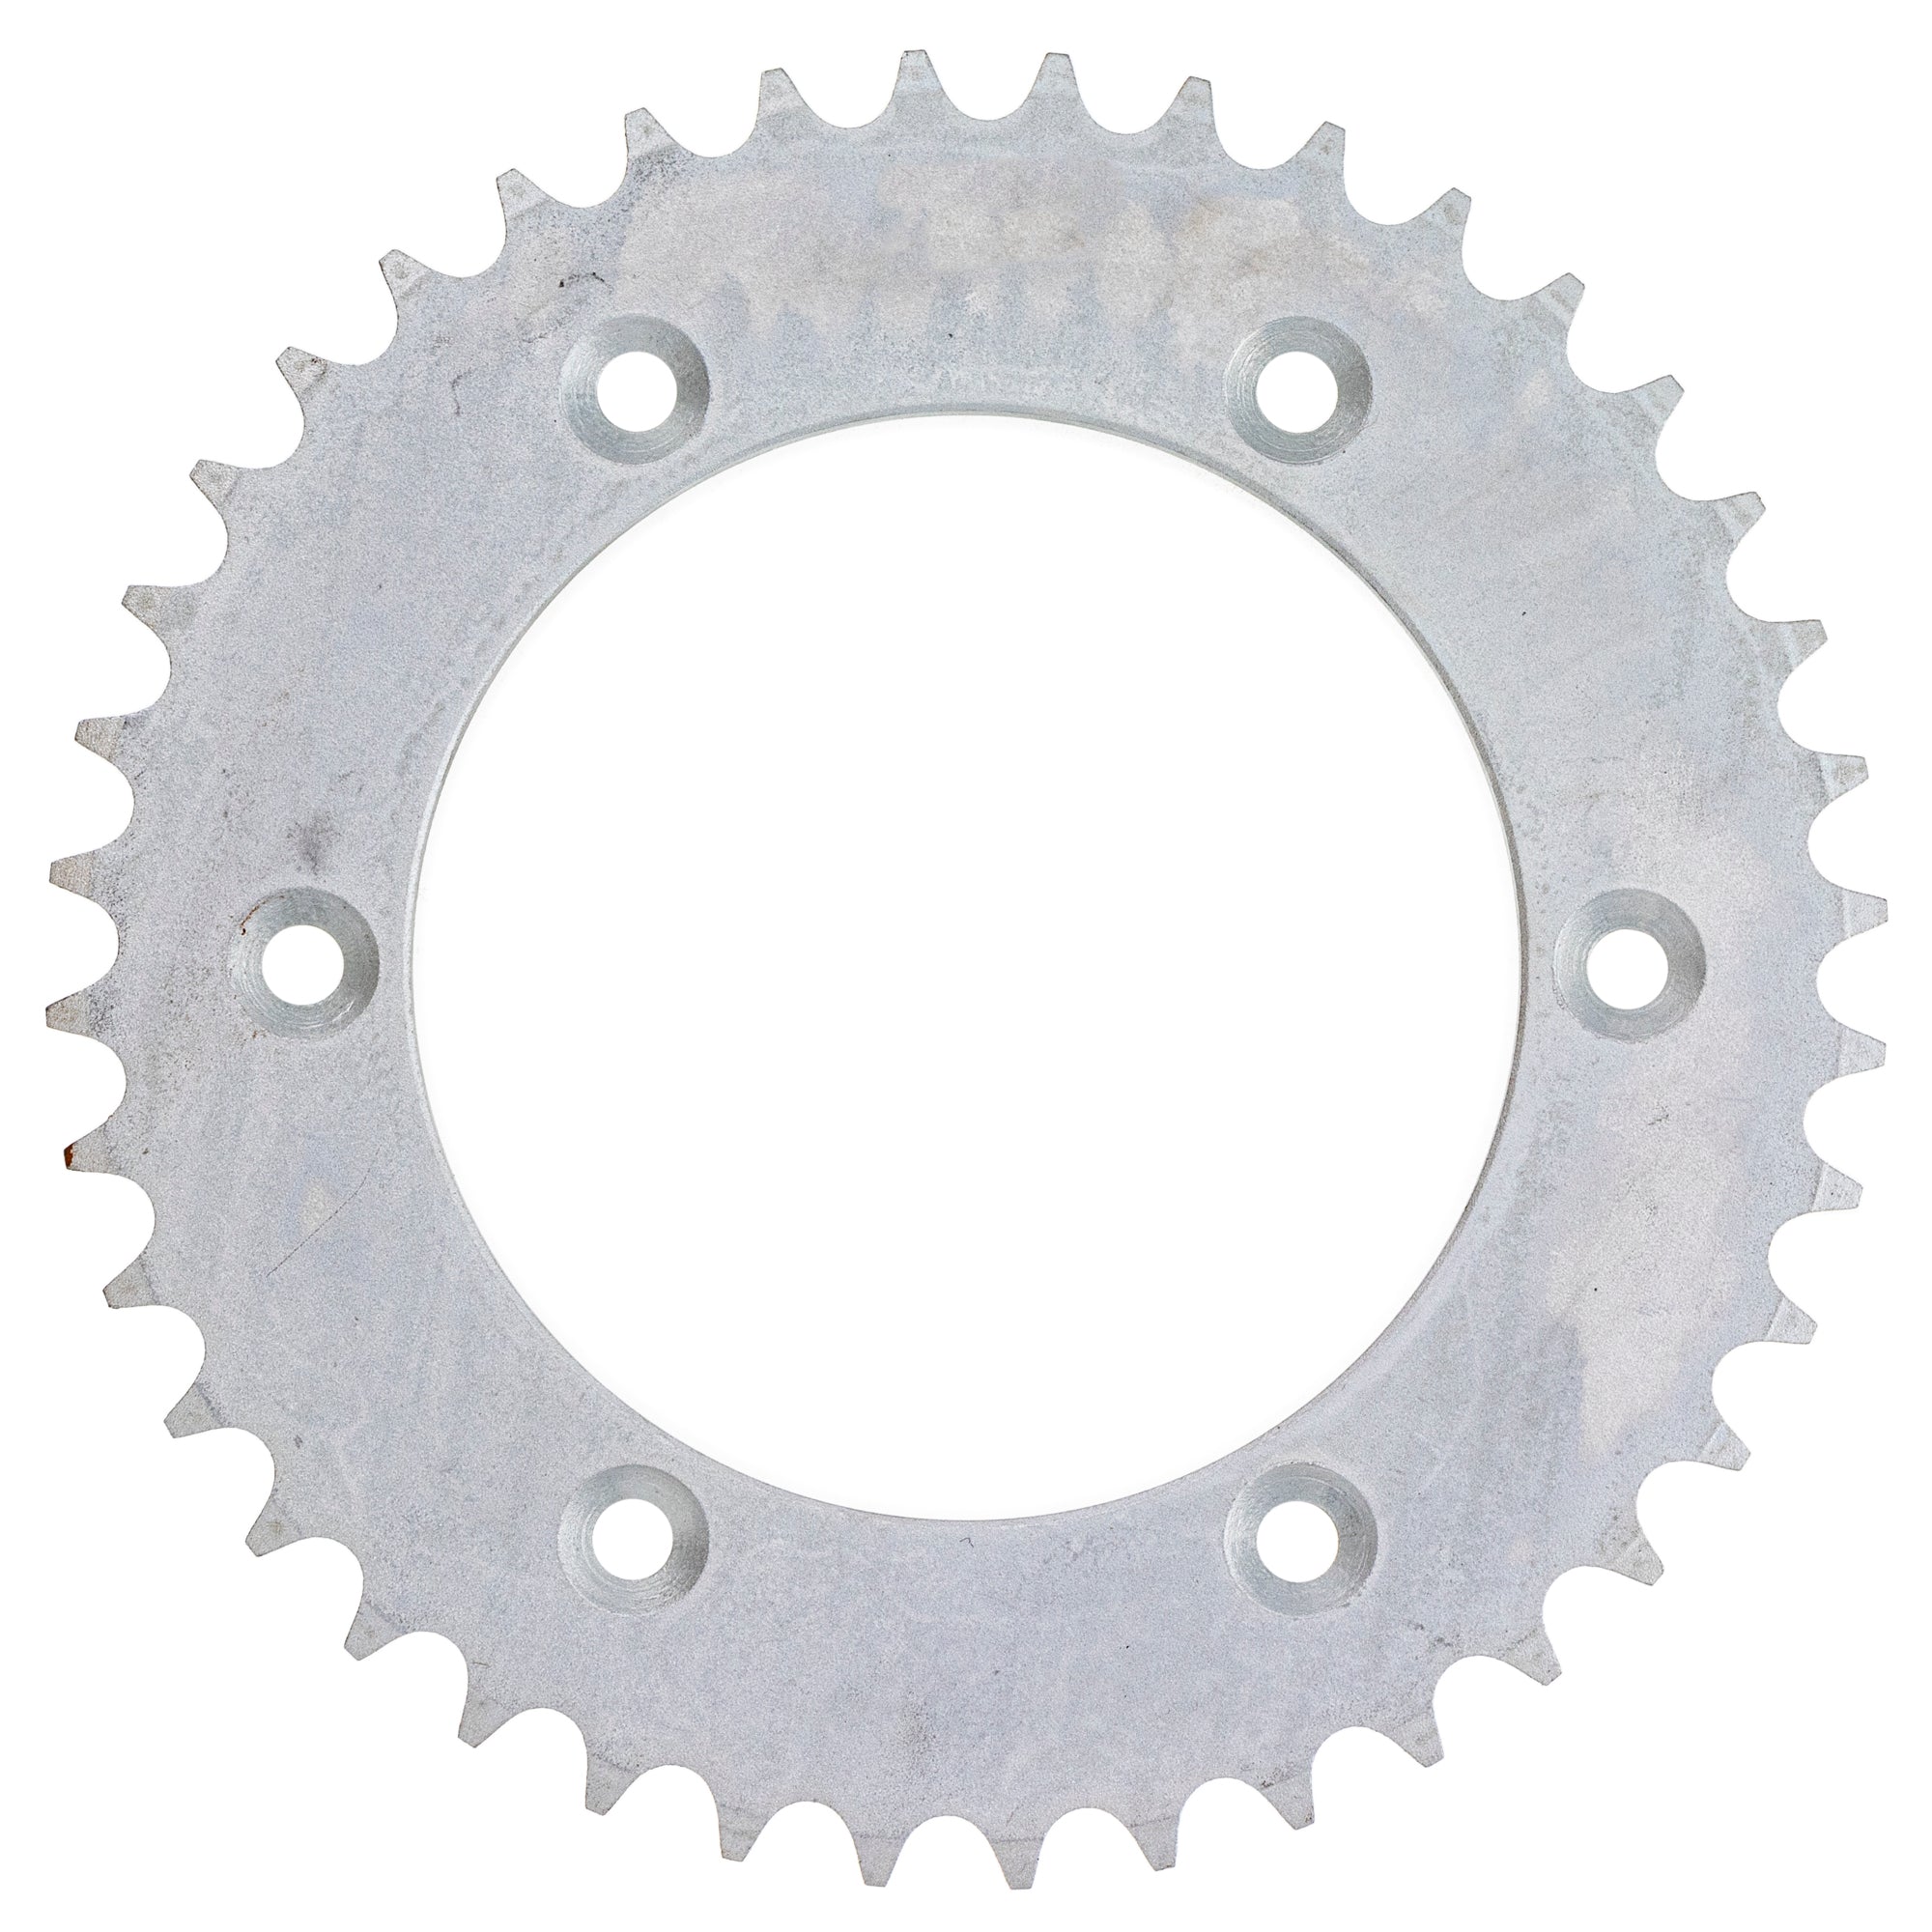 520 Pitch Front 16T Rear 40T Drive Sprocket Kit for KTM 620 SC 660 LC4